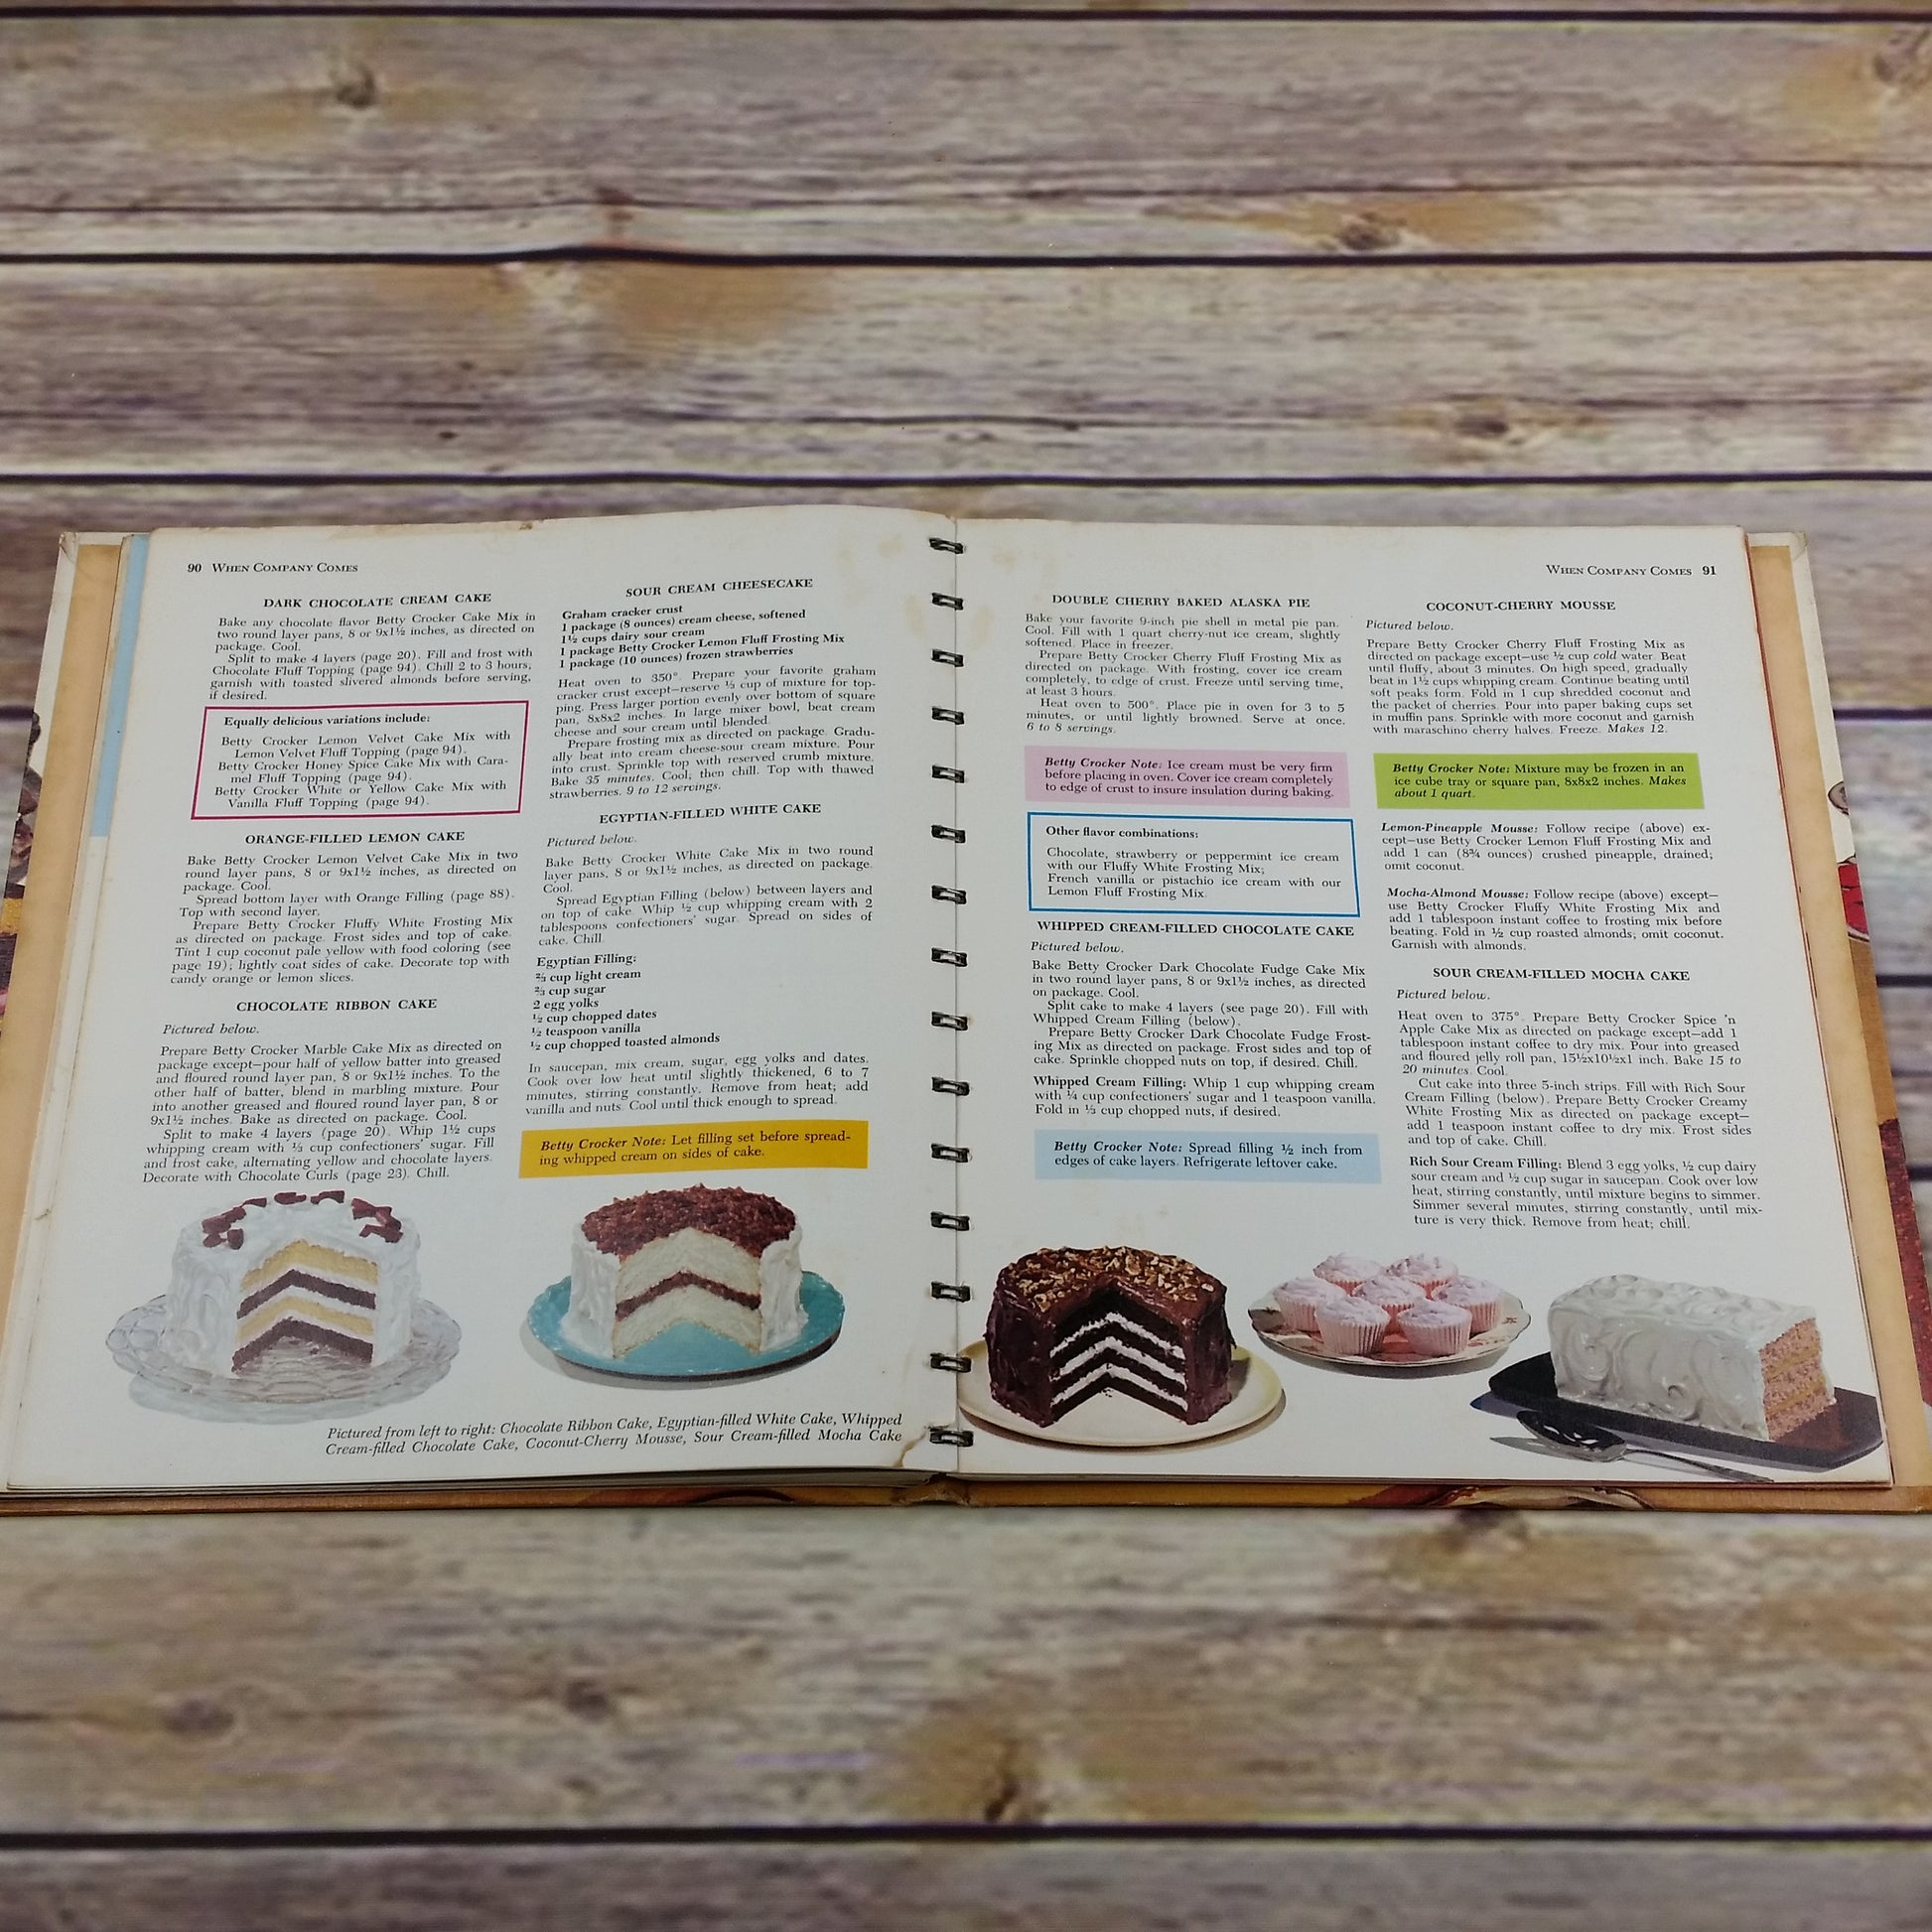 Vintage Cookbook Betty Crocker Cake and Frosting Mix 1966 First Edition First Printing Hardcover Spiral Bound - At Grandma's Table